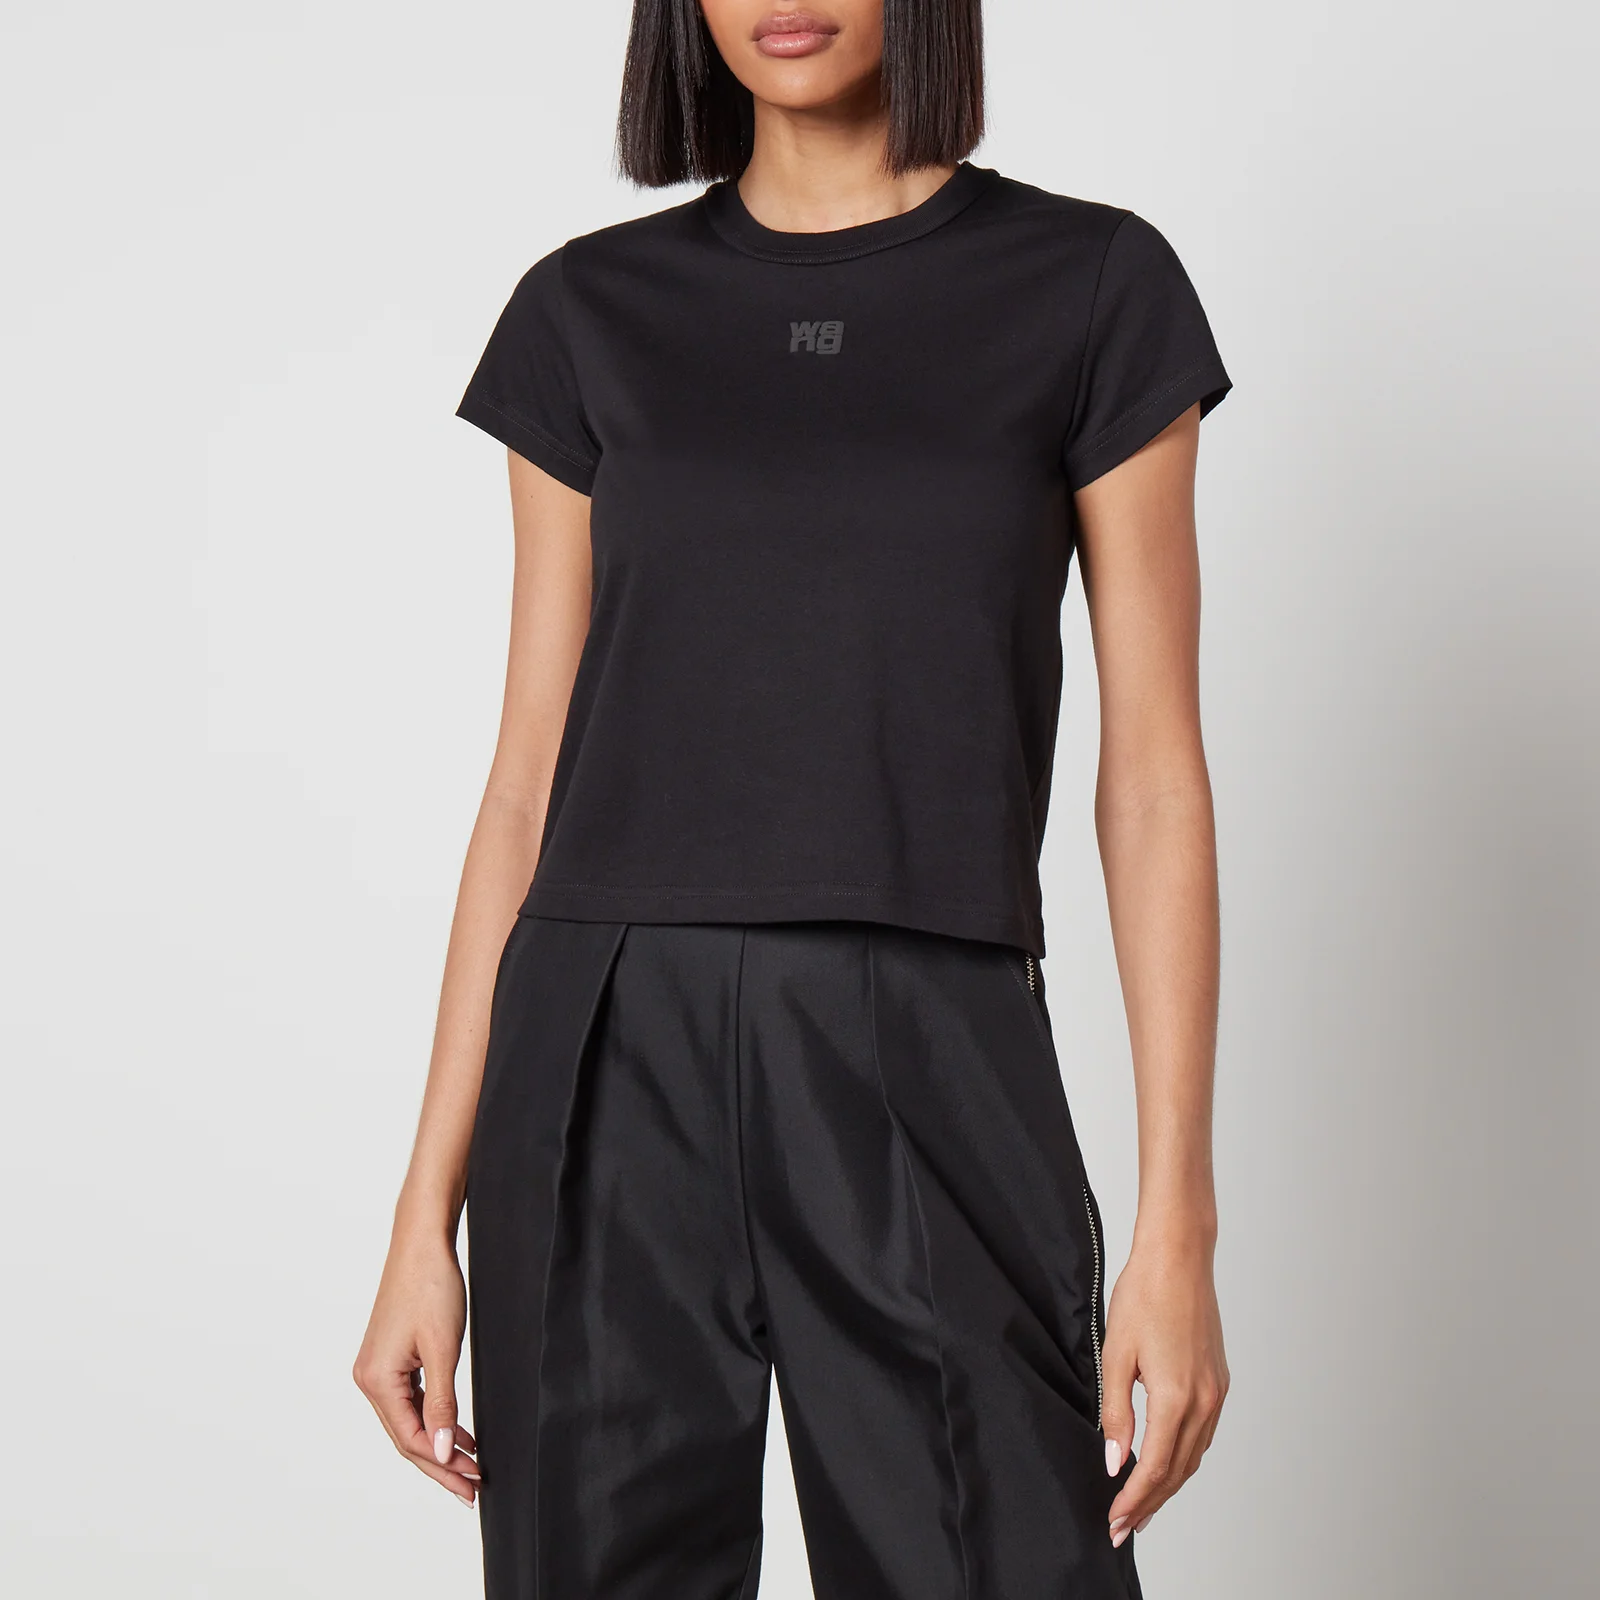 Alexander Wang Women's Essential Jersey Shrunk Tee With Puff Logo And Bound Neck - Black Image 1